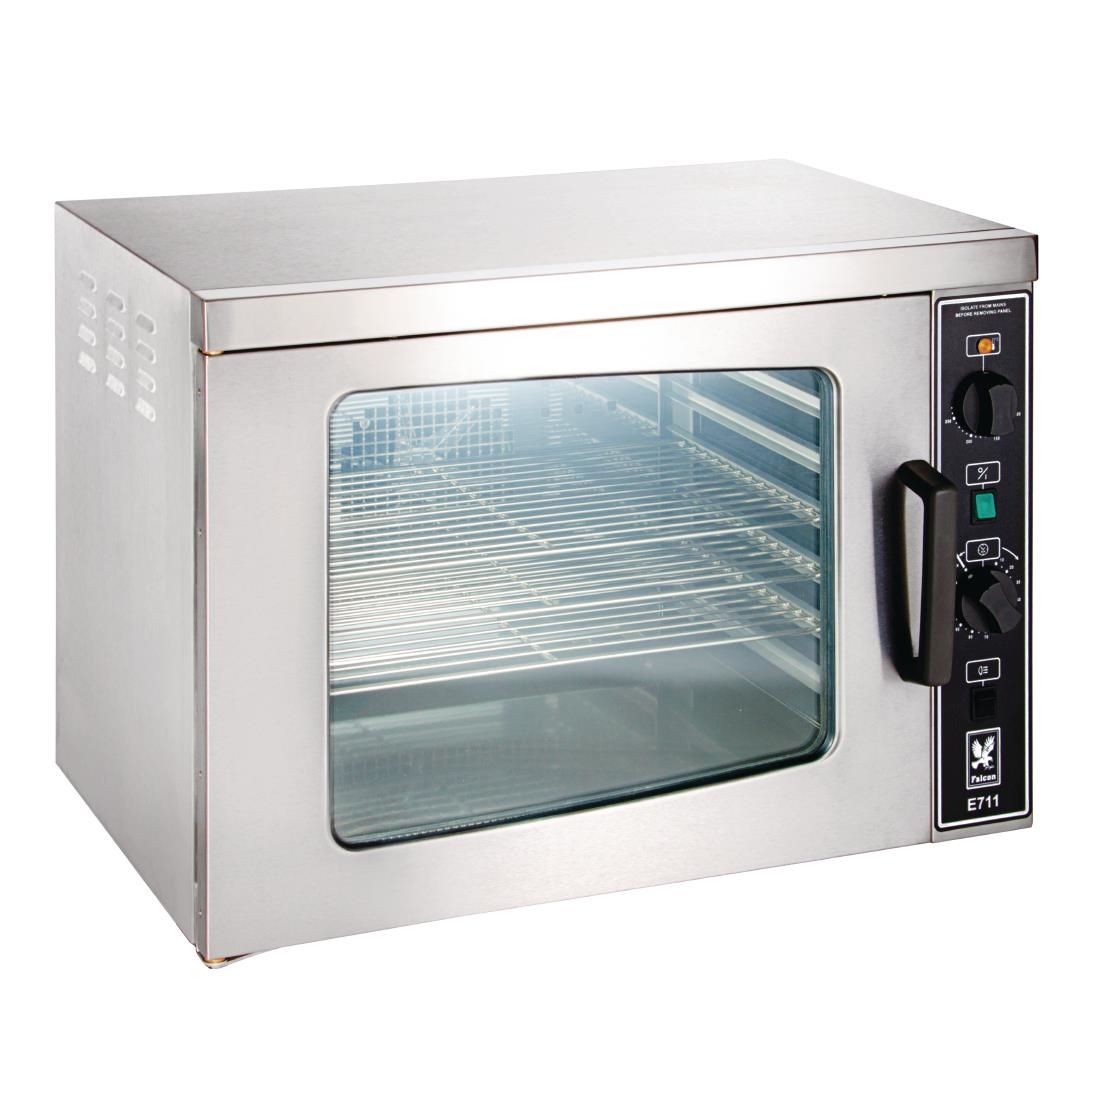 Falcon Convection Oven E711 JD Catering Equipment Solutions Ltd